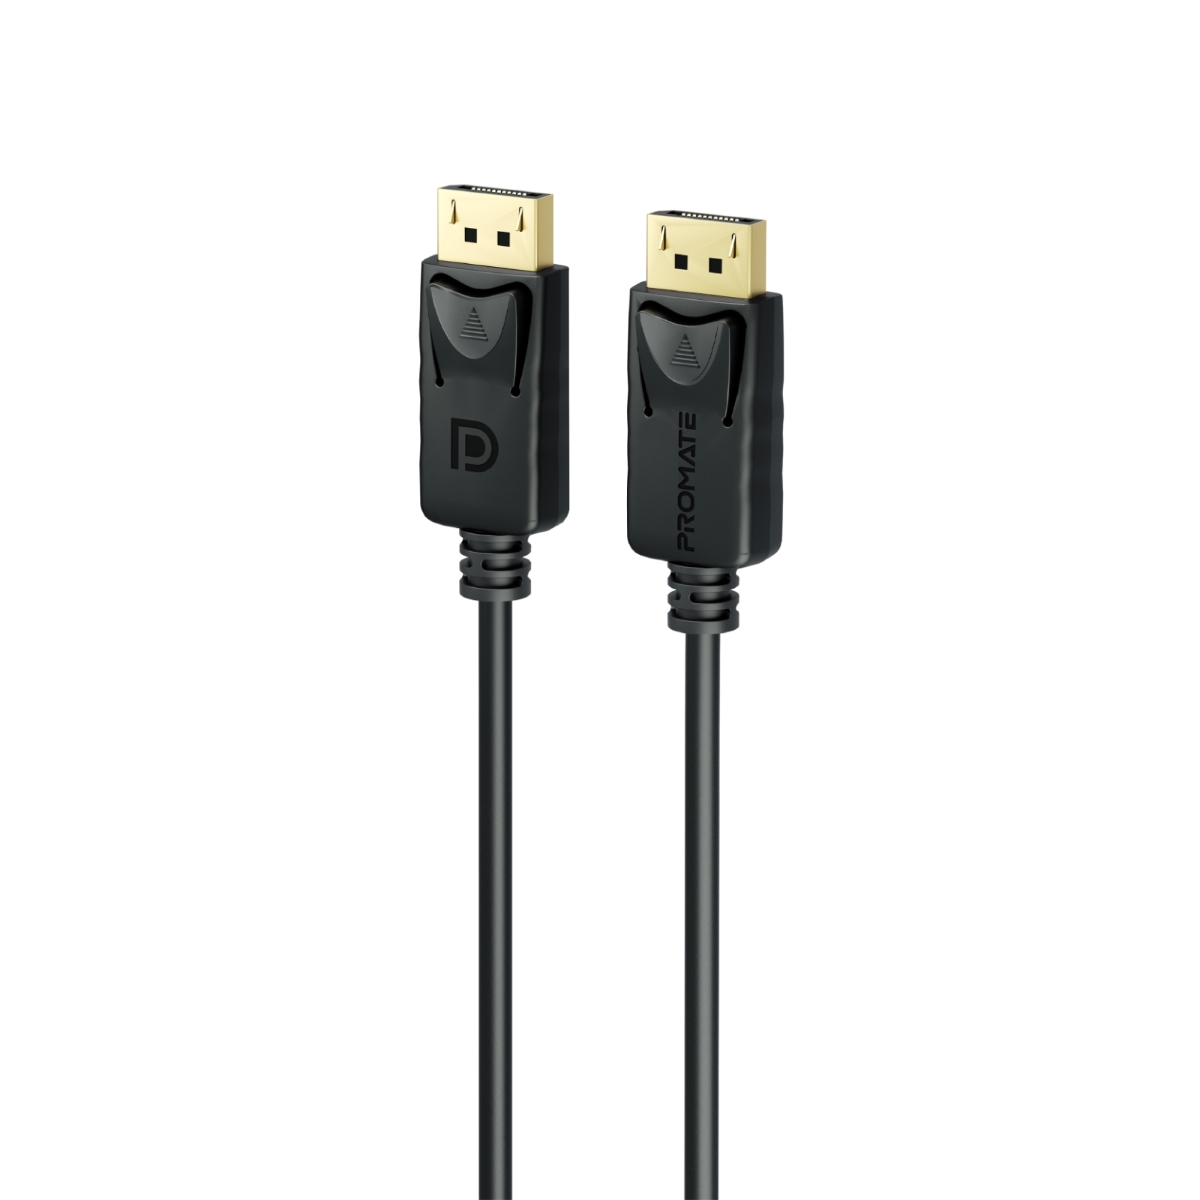 Promate DisplayPort Cable with HD 8K@60Hz Display, 32.4Gbps Bandwidth and 2m Slim Cable, DPLink-200